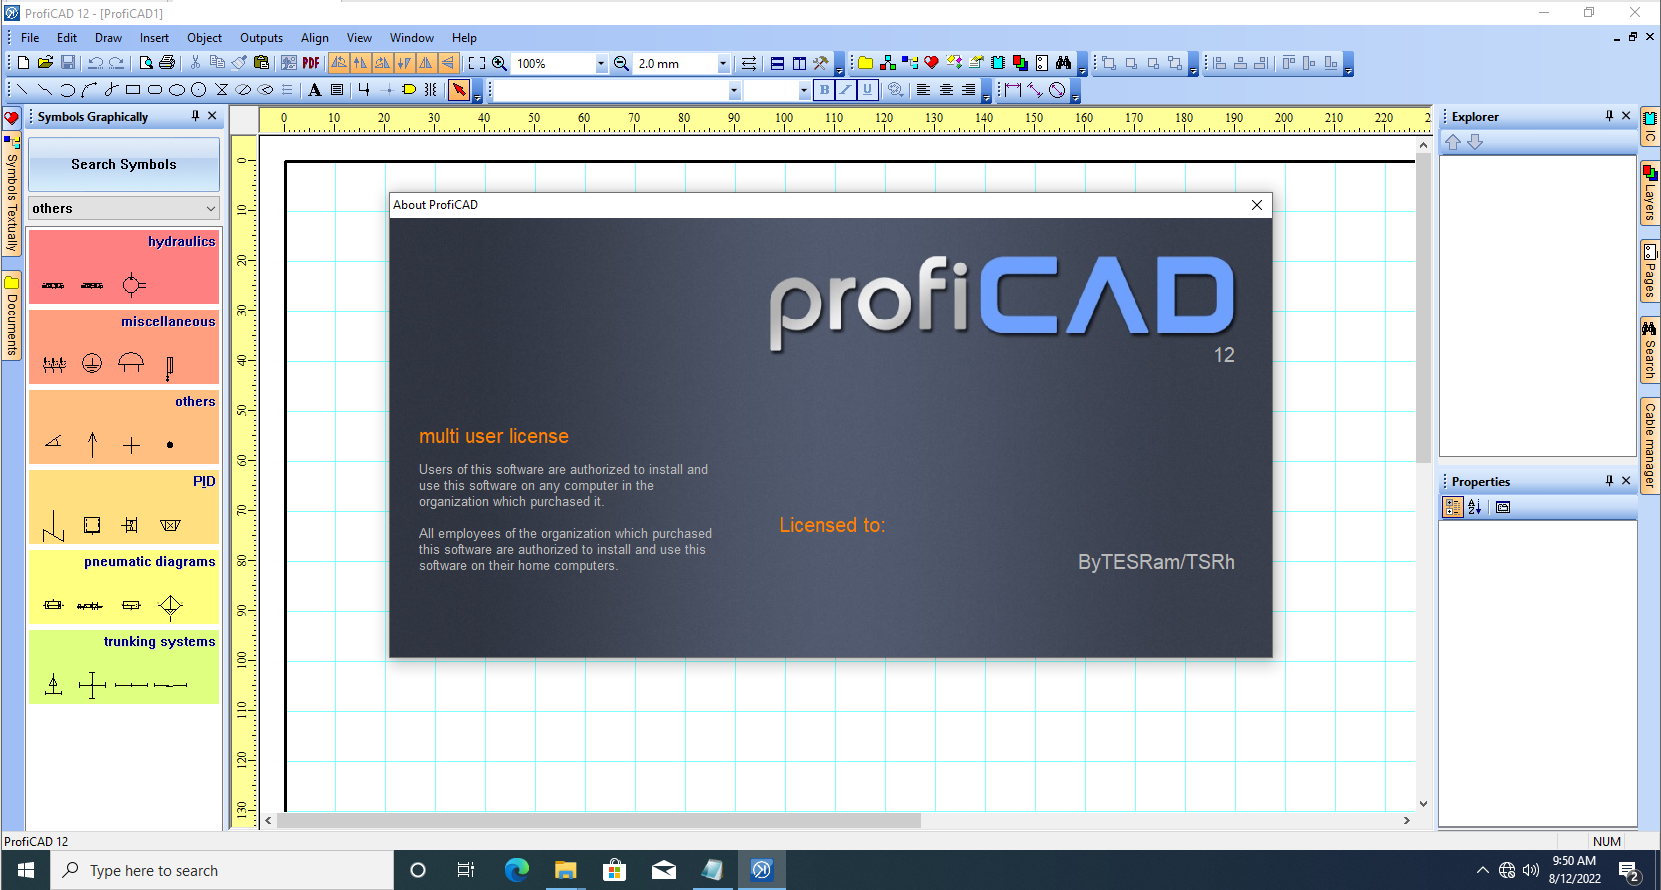 Working with ProfiCAD 12.0 full